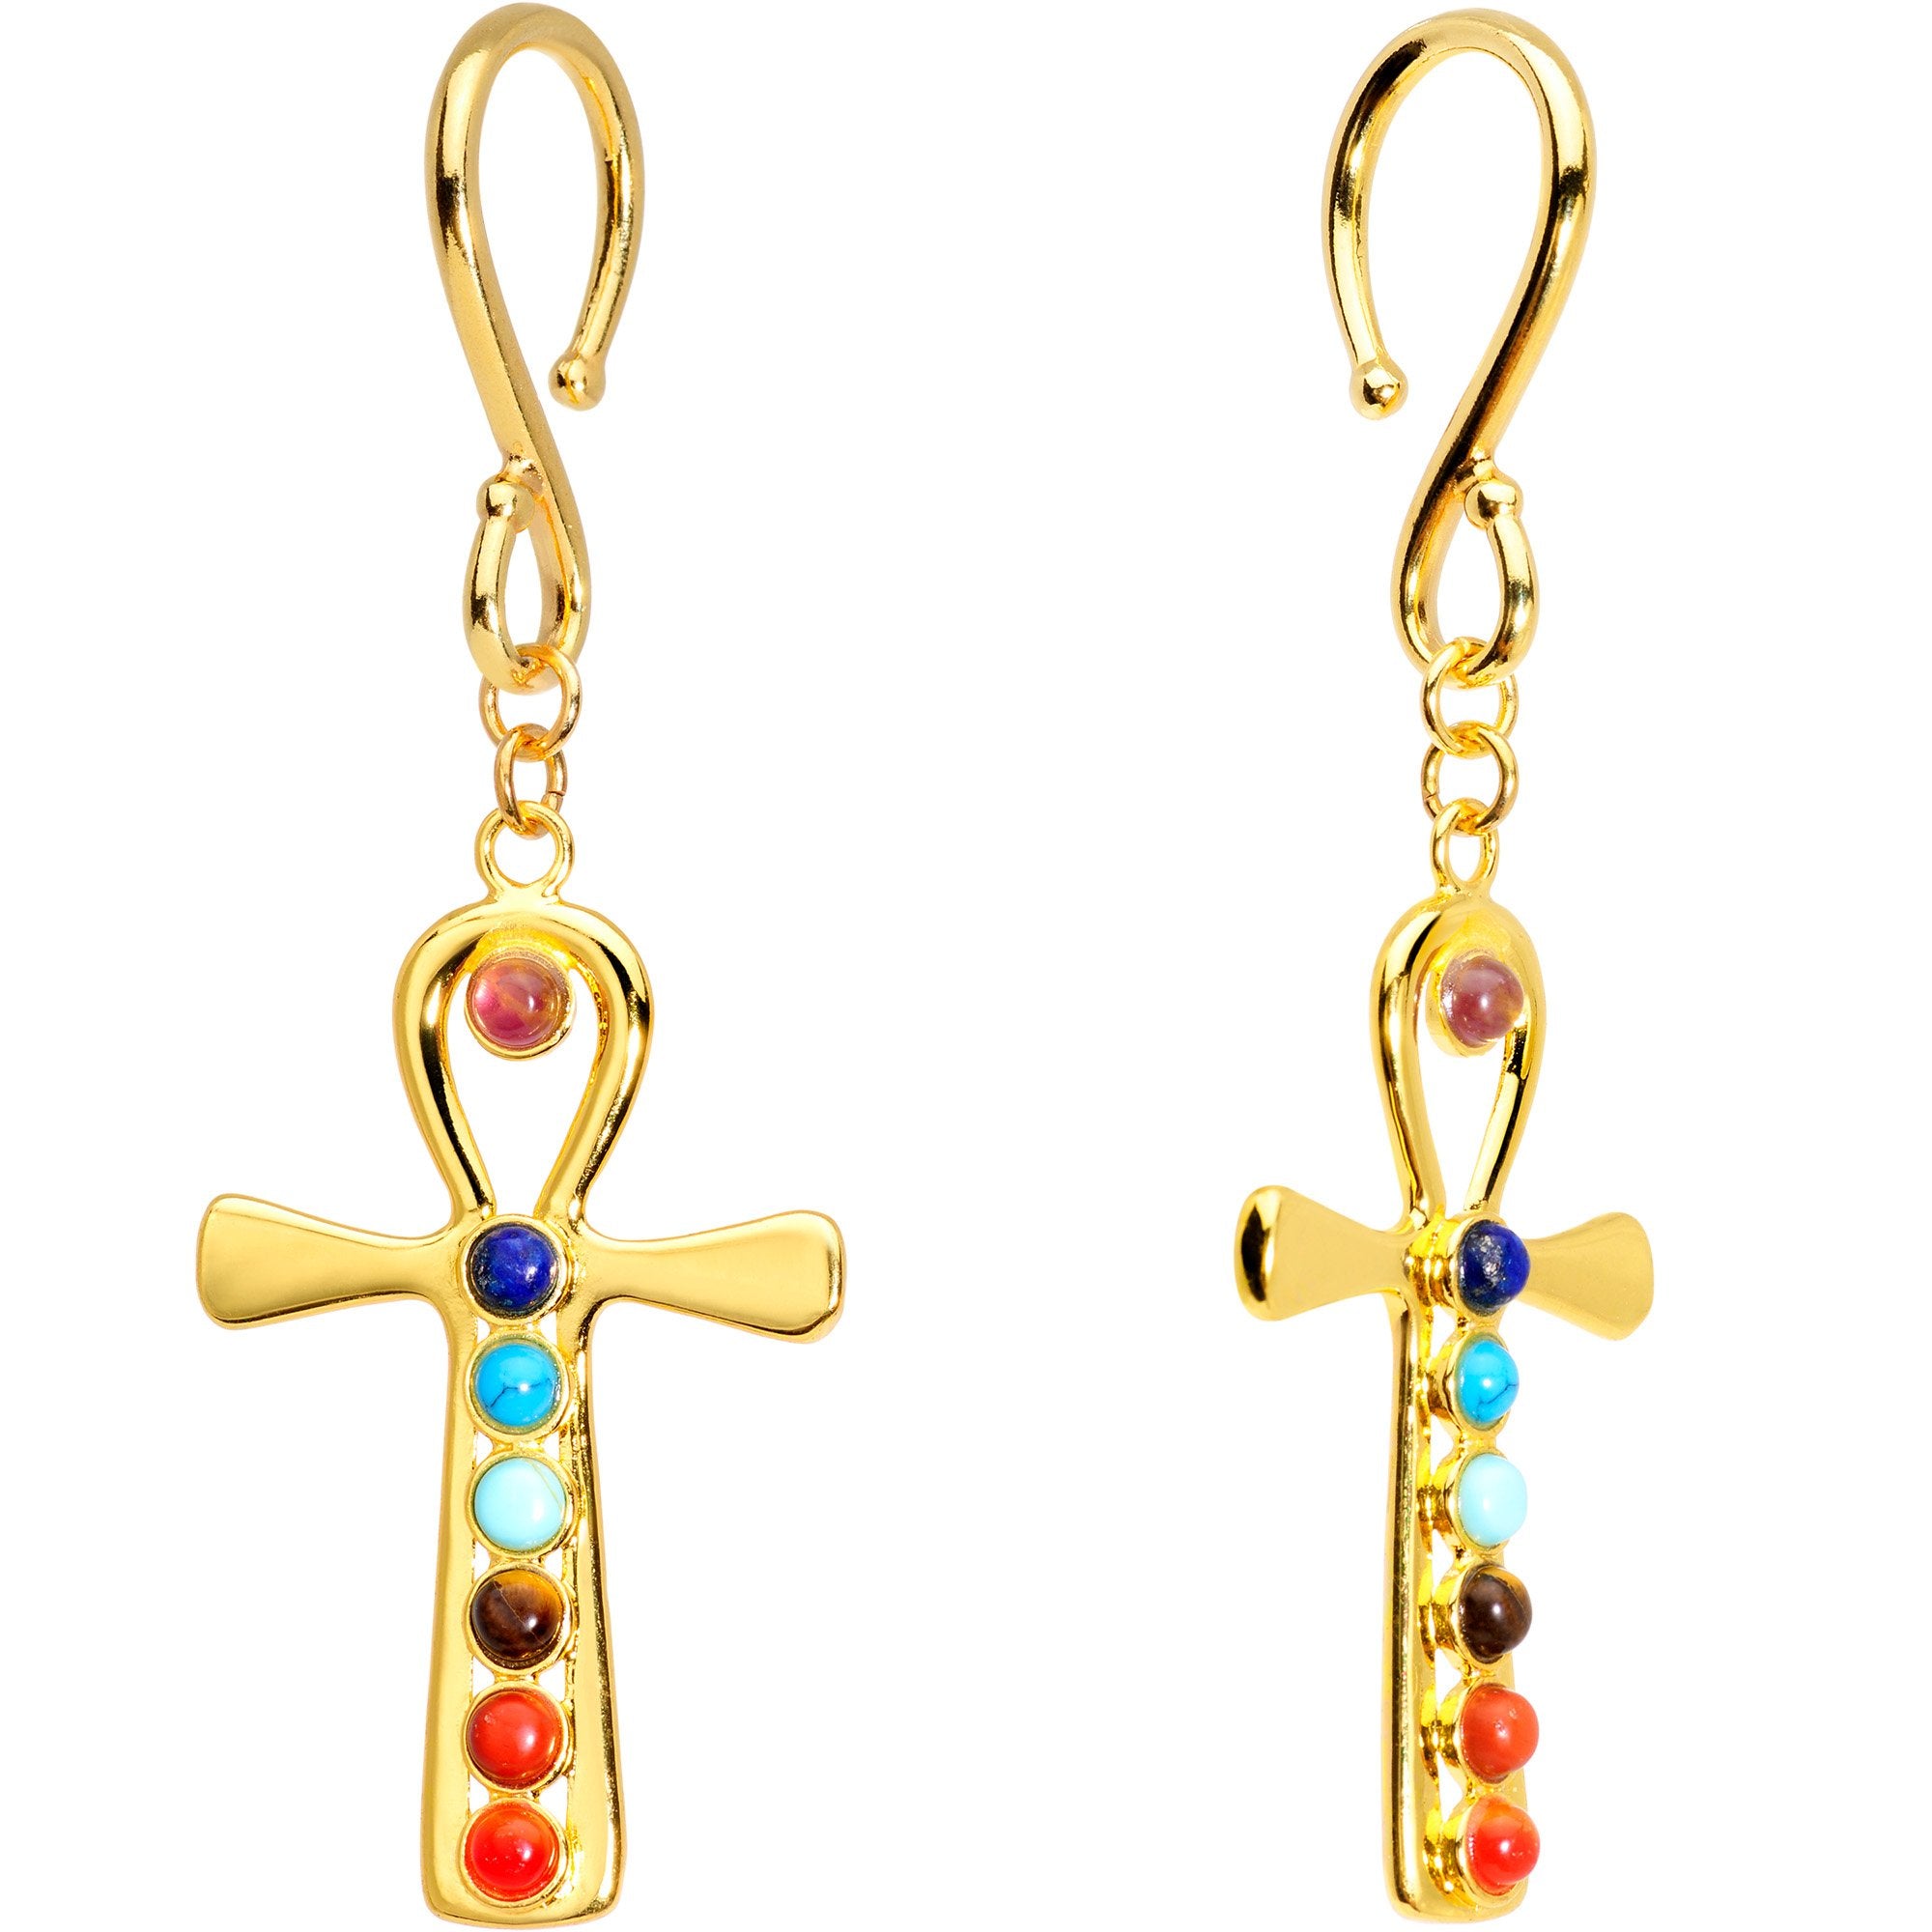 Handcrafted Gold Plated Balanced Life Chakra Ankh Ear Weights